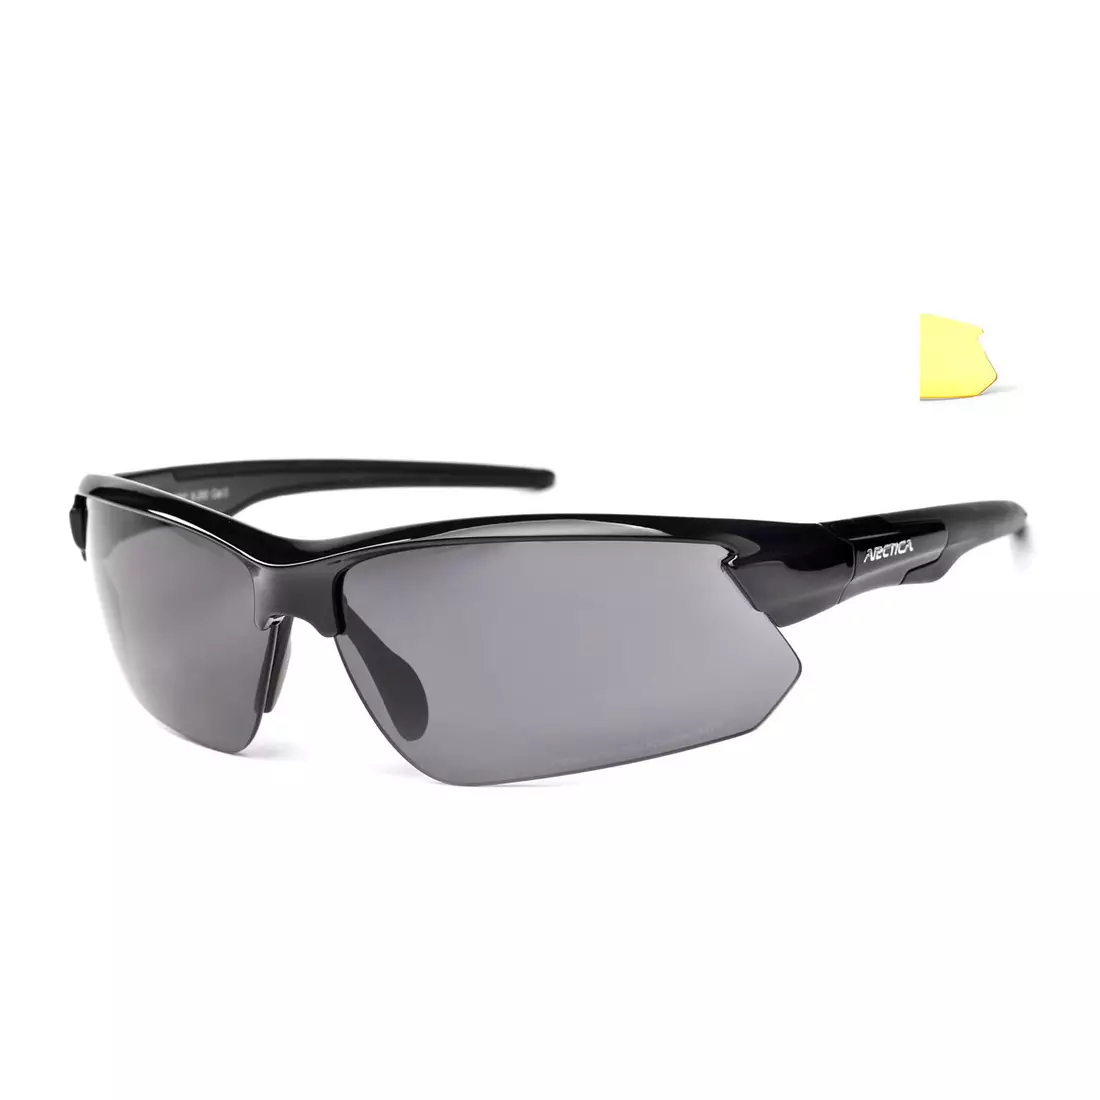 ARCTICA S 293 cycling/sports glasses. Replaceable lenses